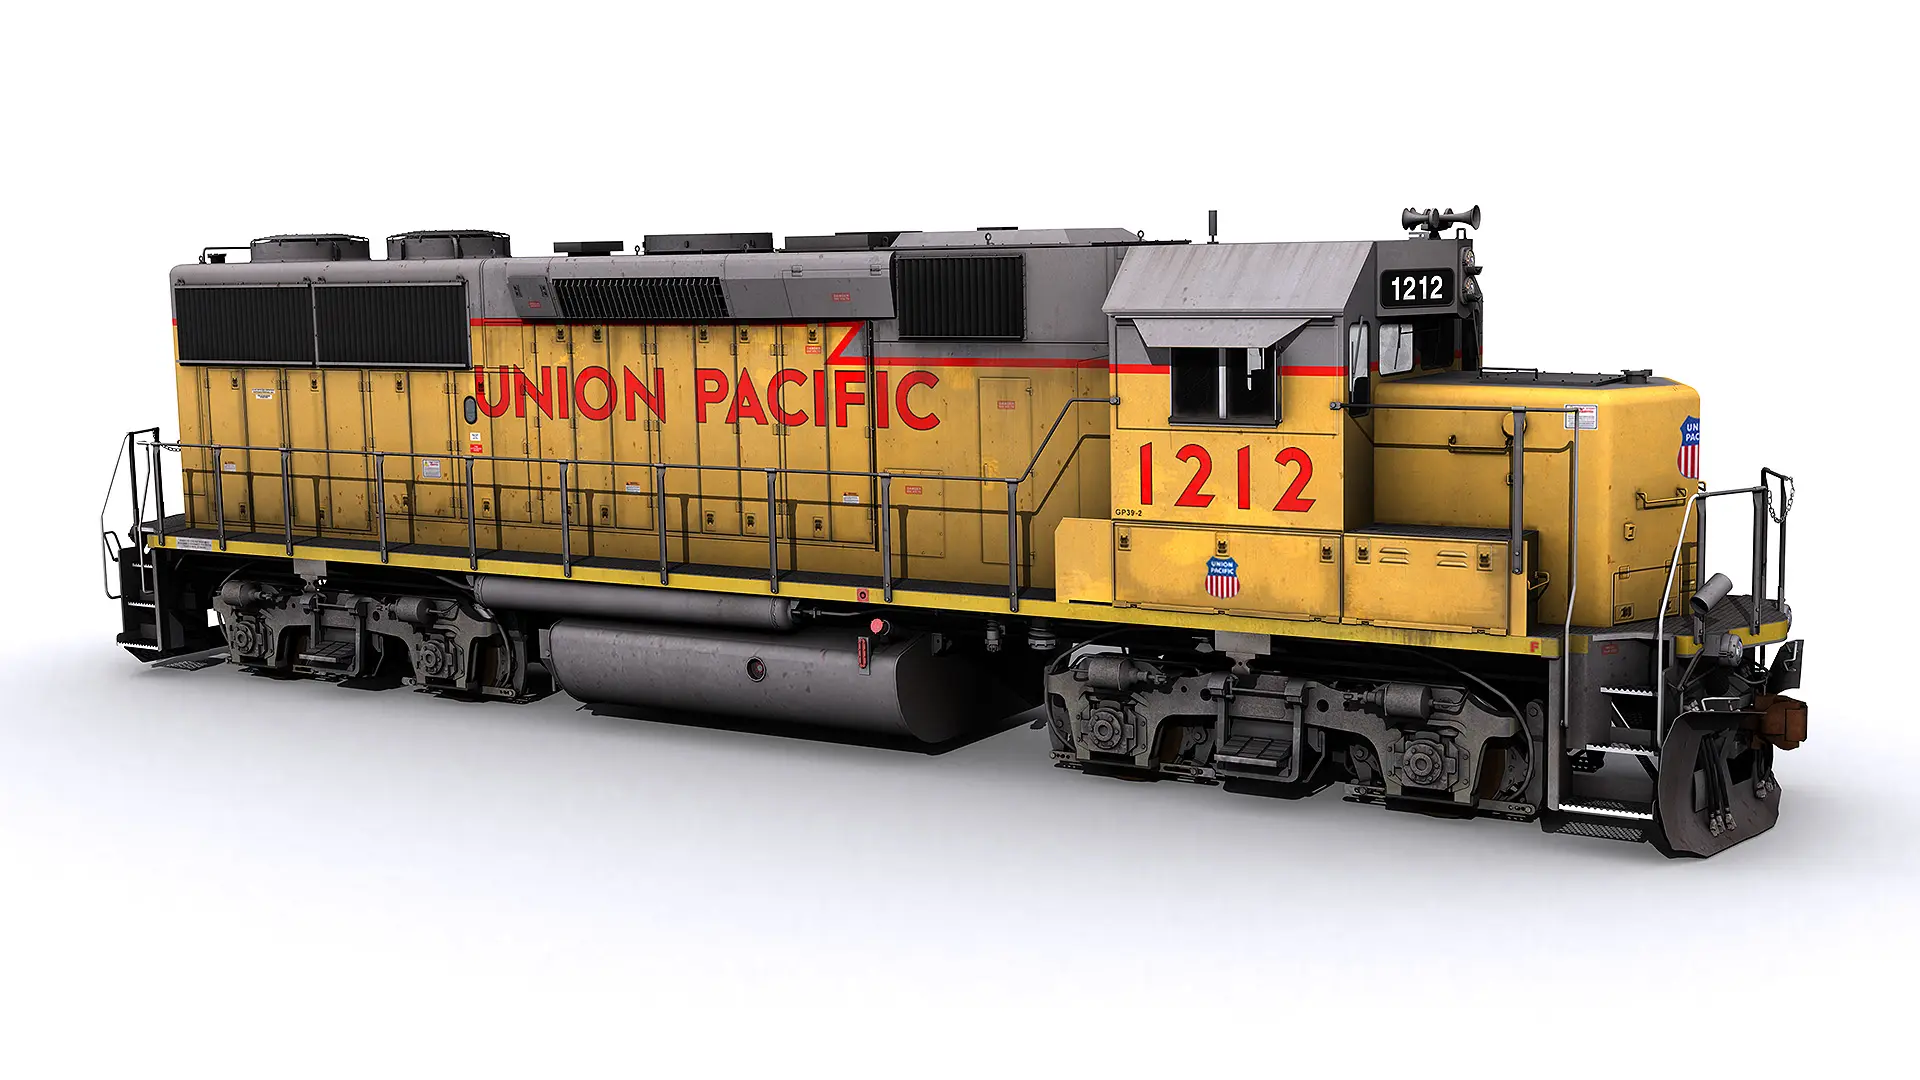 The side view of the union pasific engine model